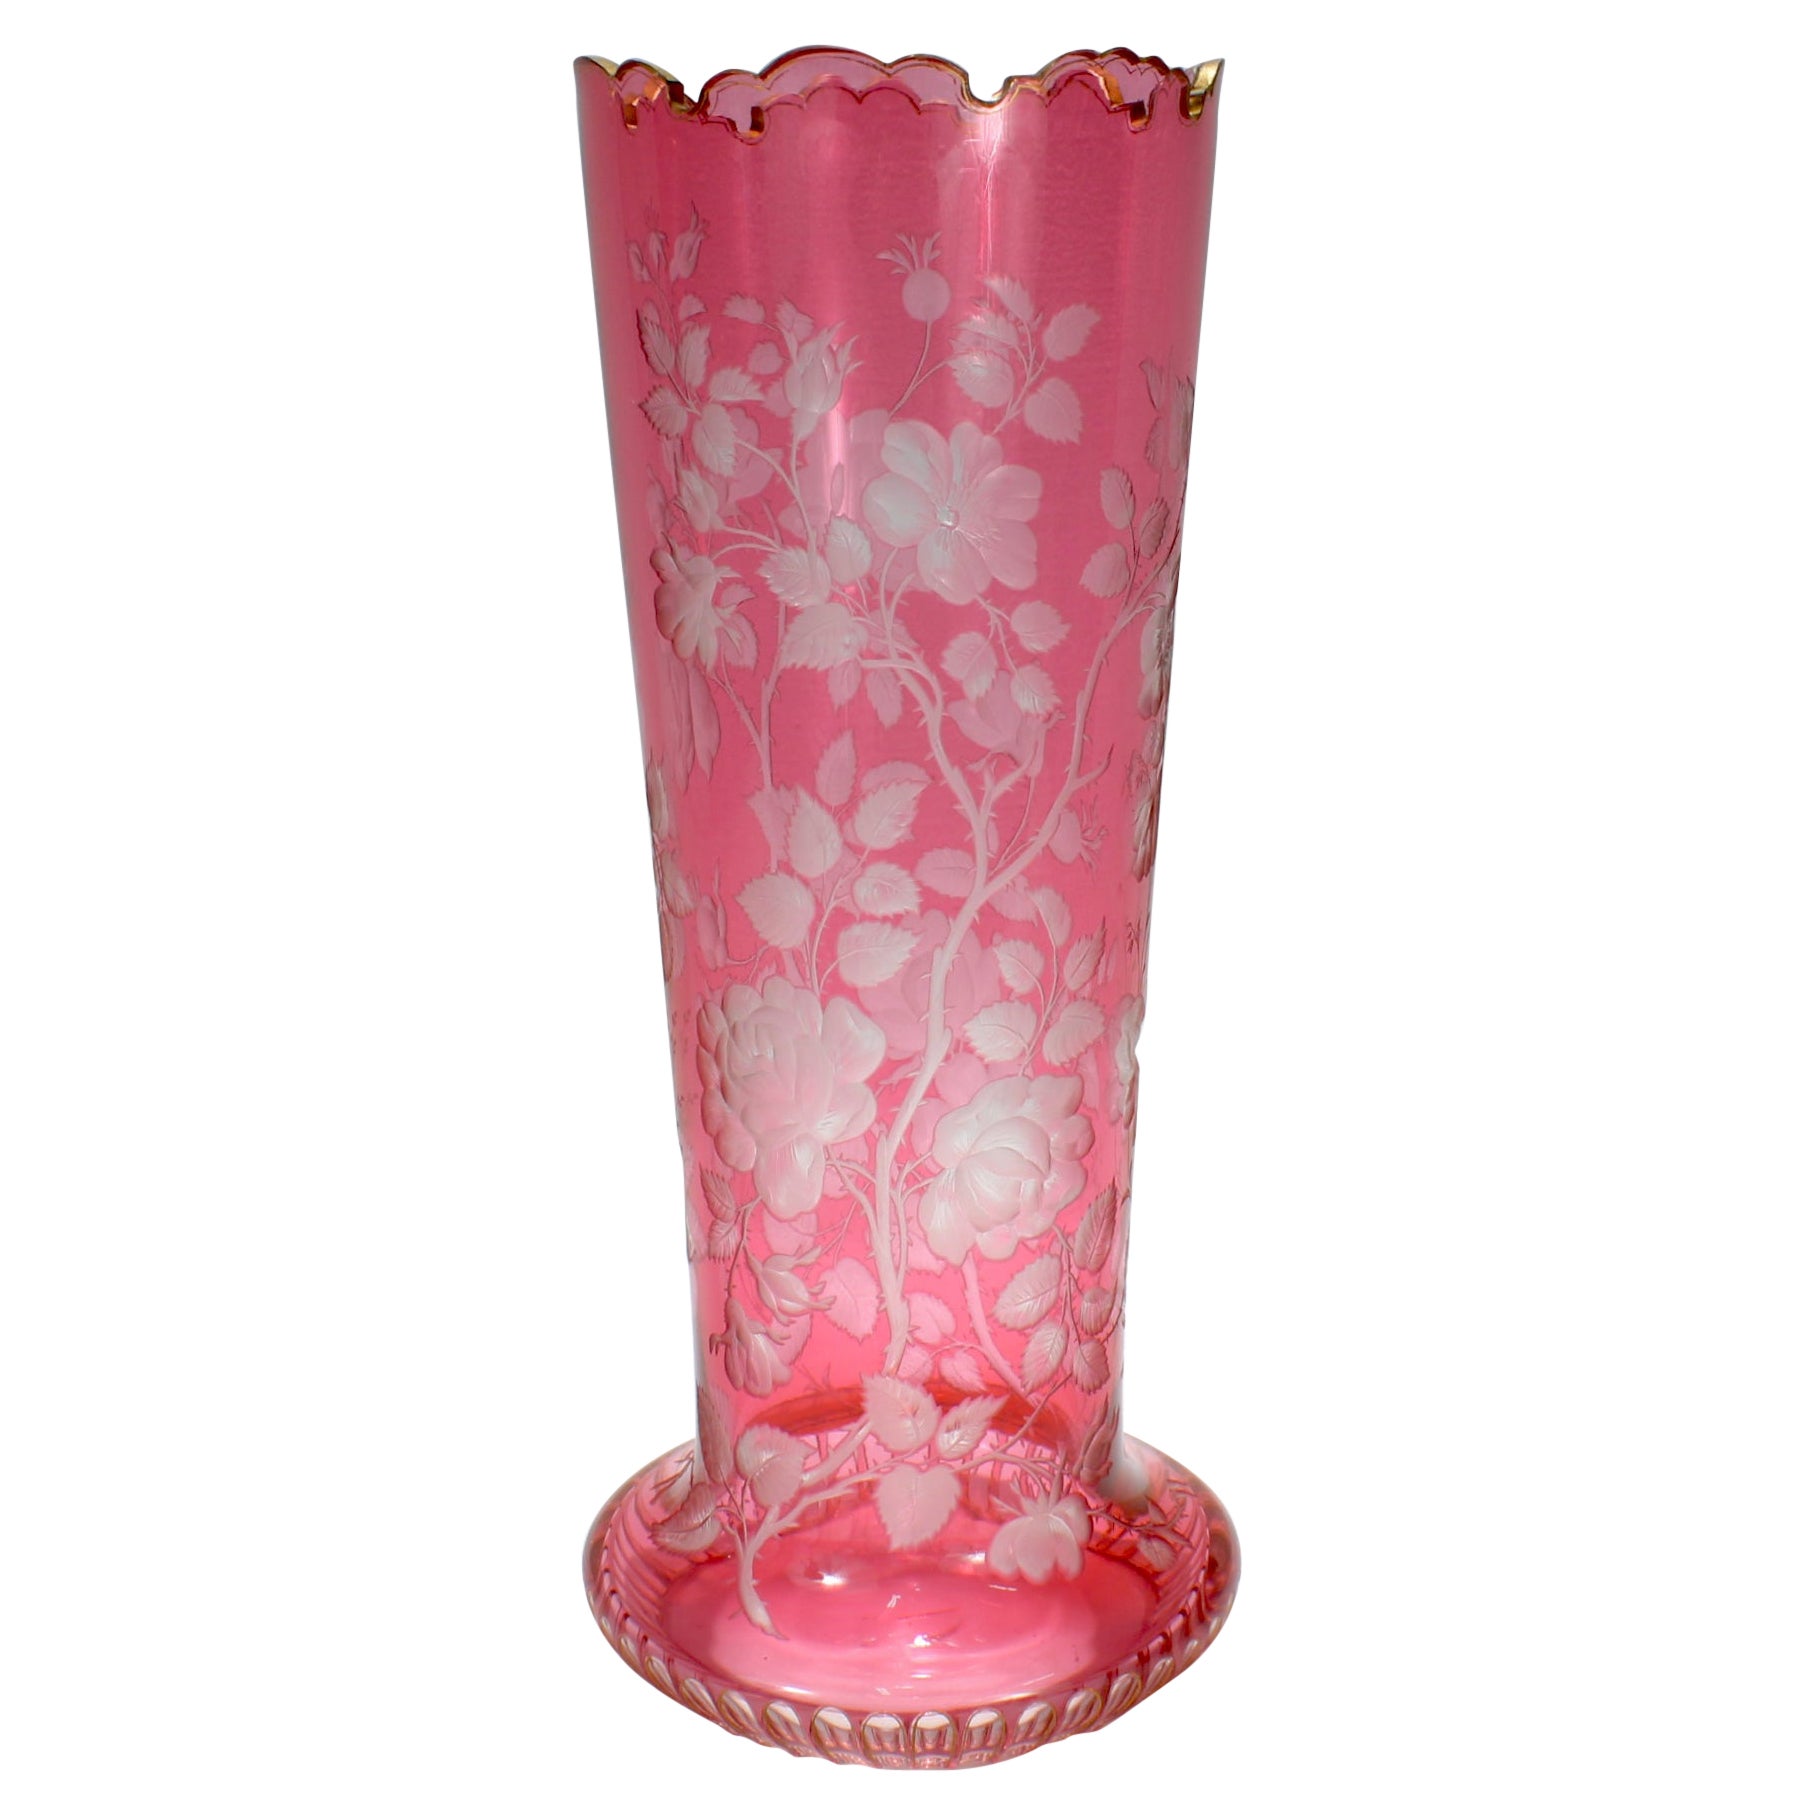 Antique Bohemian Cranberry Overlay Cut to Clear Glass Vase with Roses